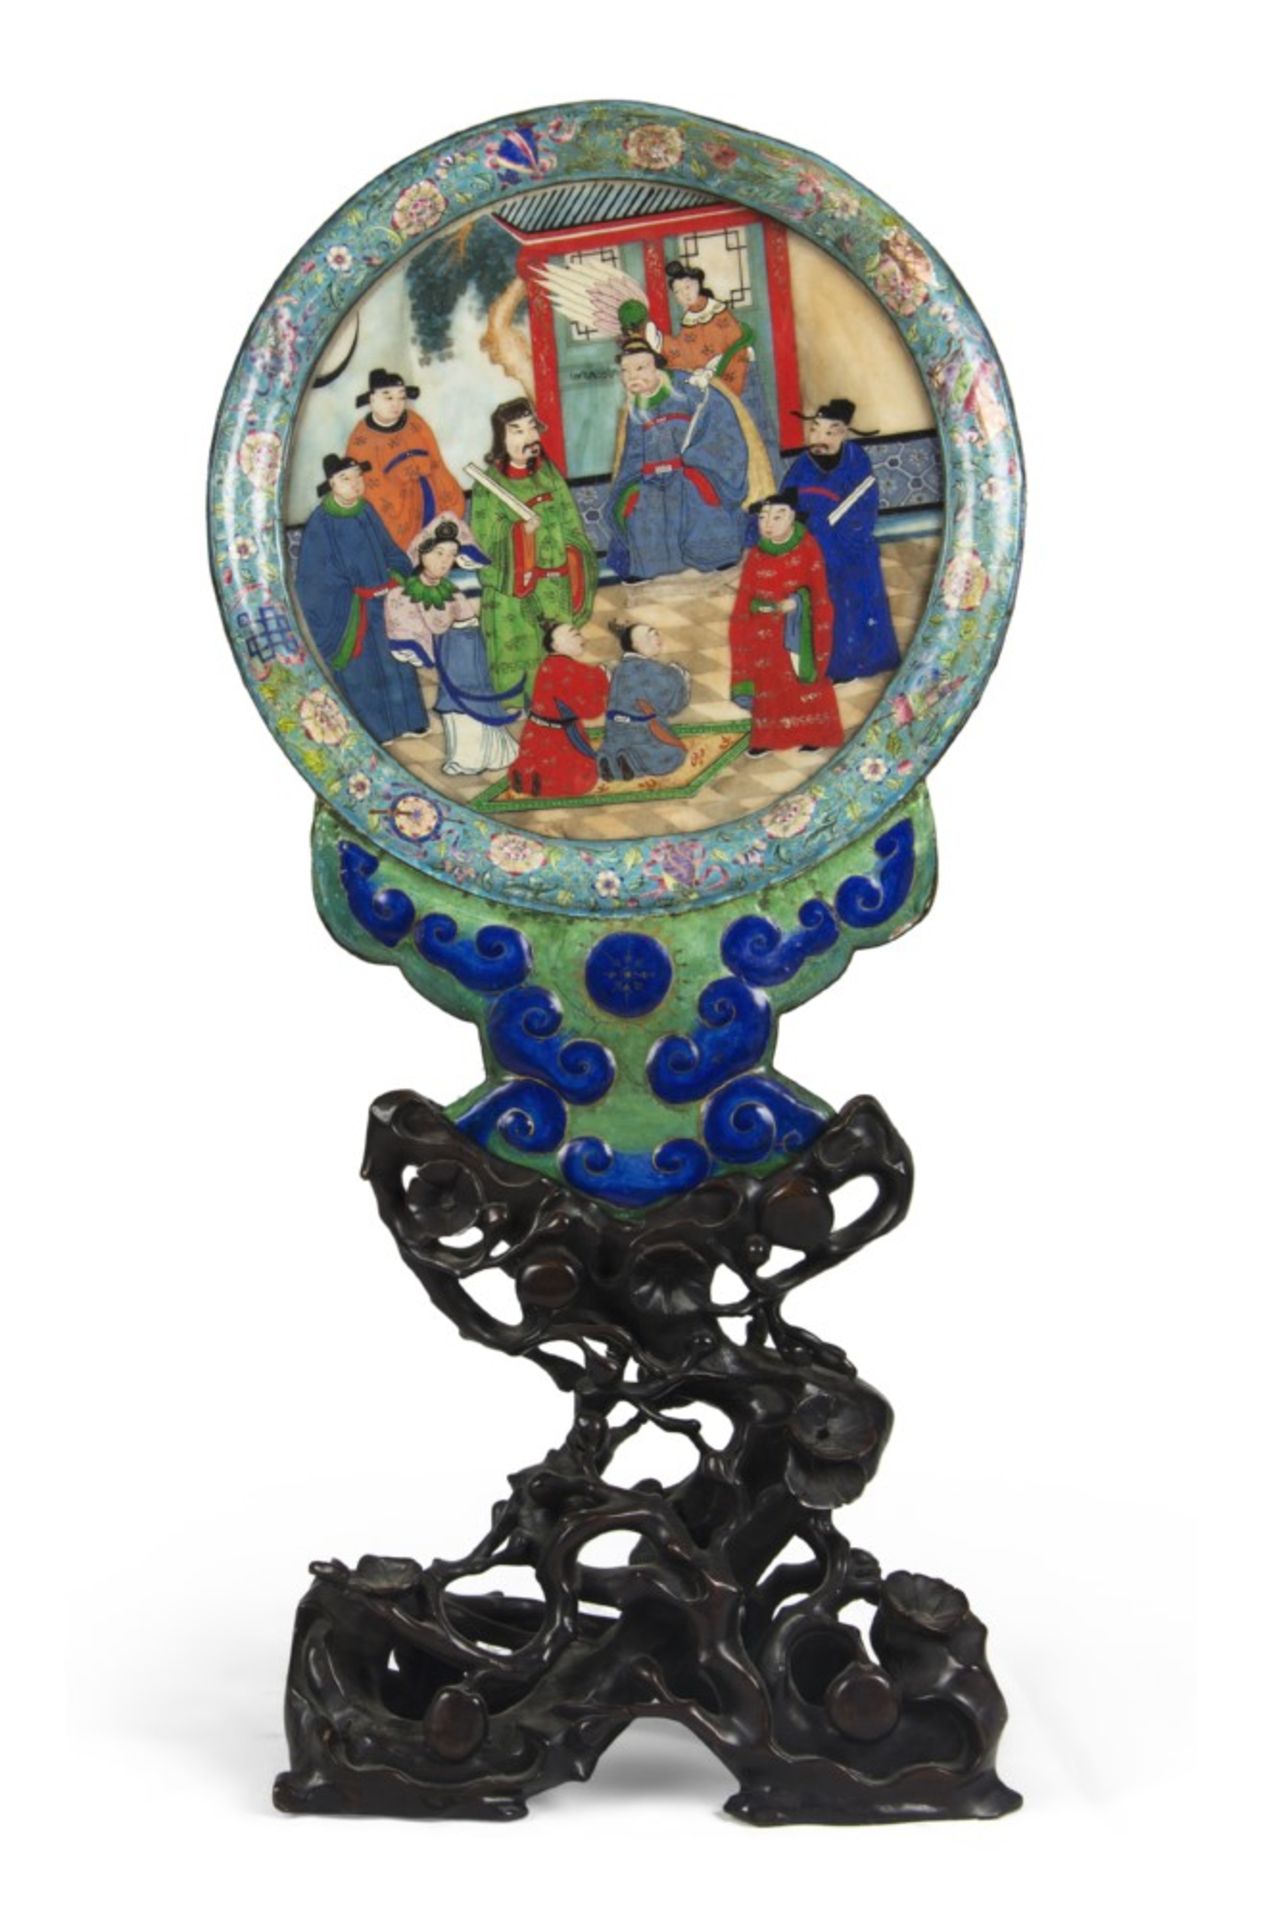 A small Chinese cloisonnè metal screen. 19th century. Measures cm. 76 x 33 x 15. PICCOLO PARAVENTO